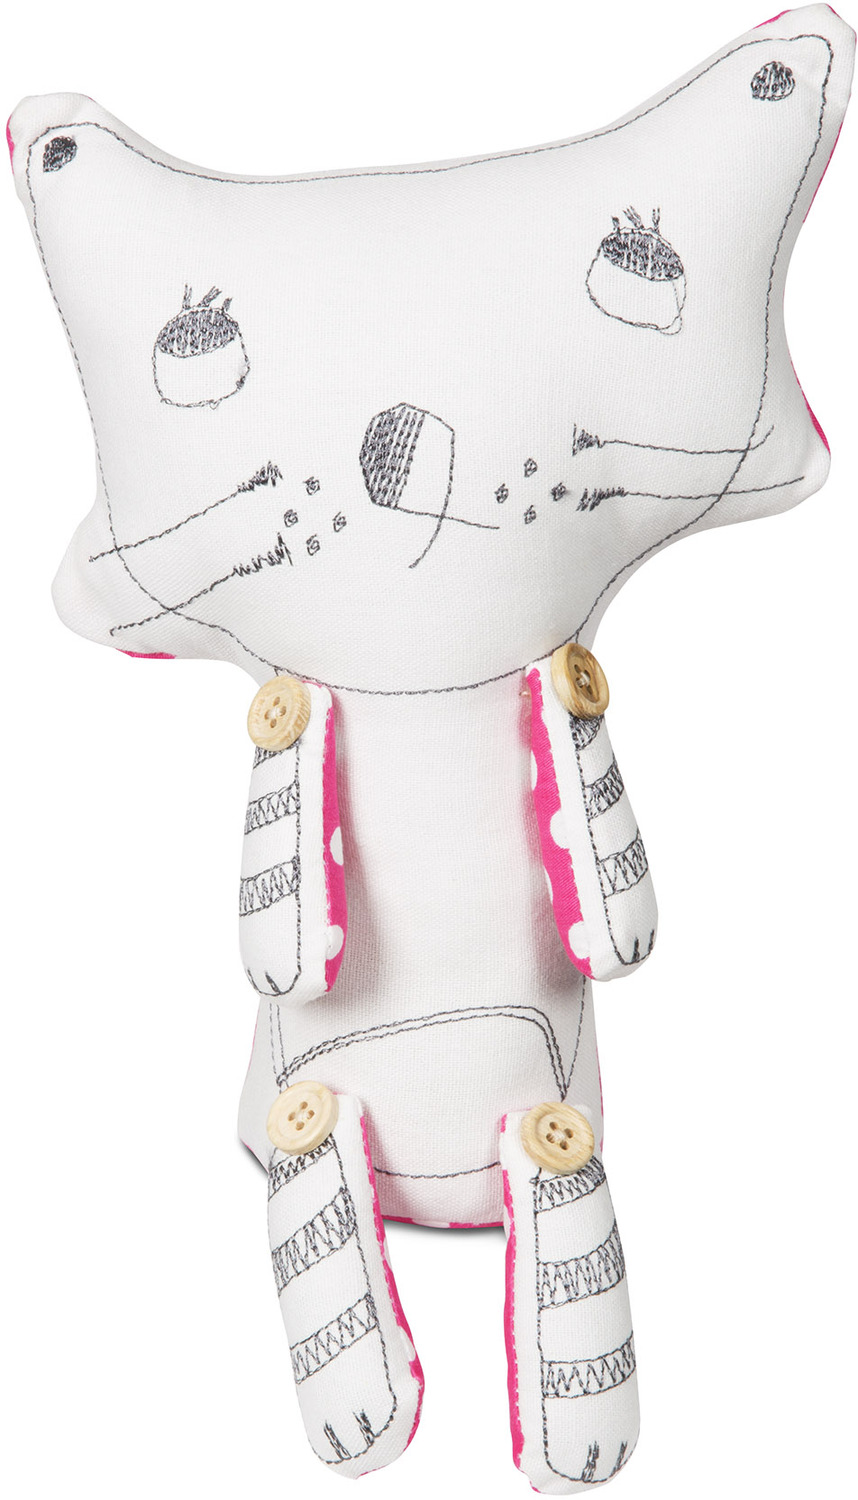 Chloe the Cat by Stitched & Stuffed - Chloe the Cat - 11" Cat Stuffed Animal/Door Stopper